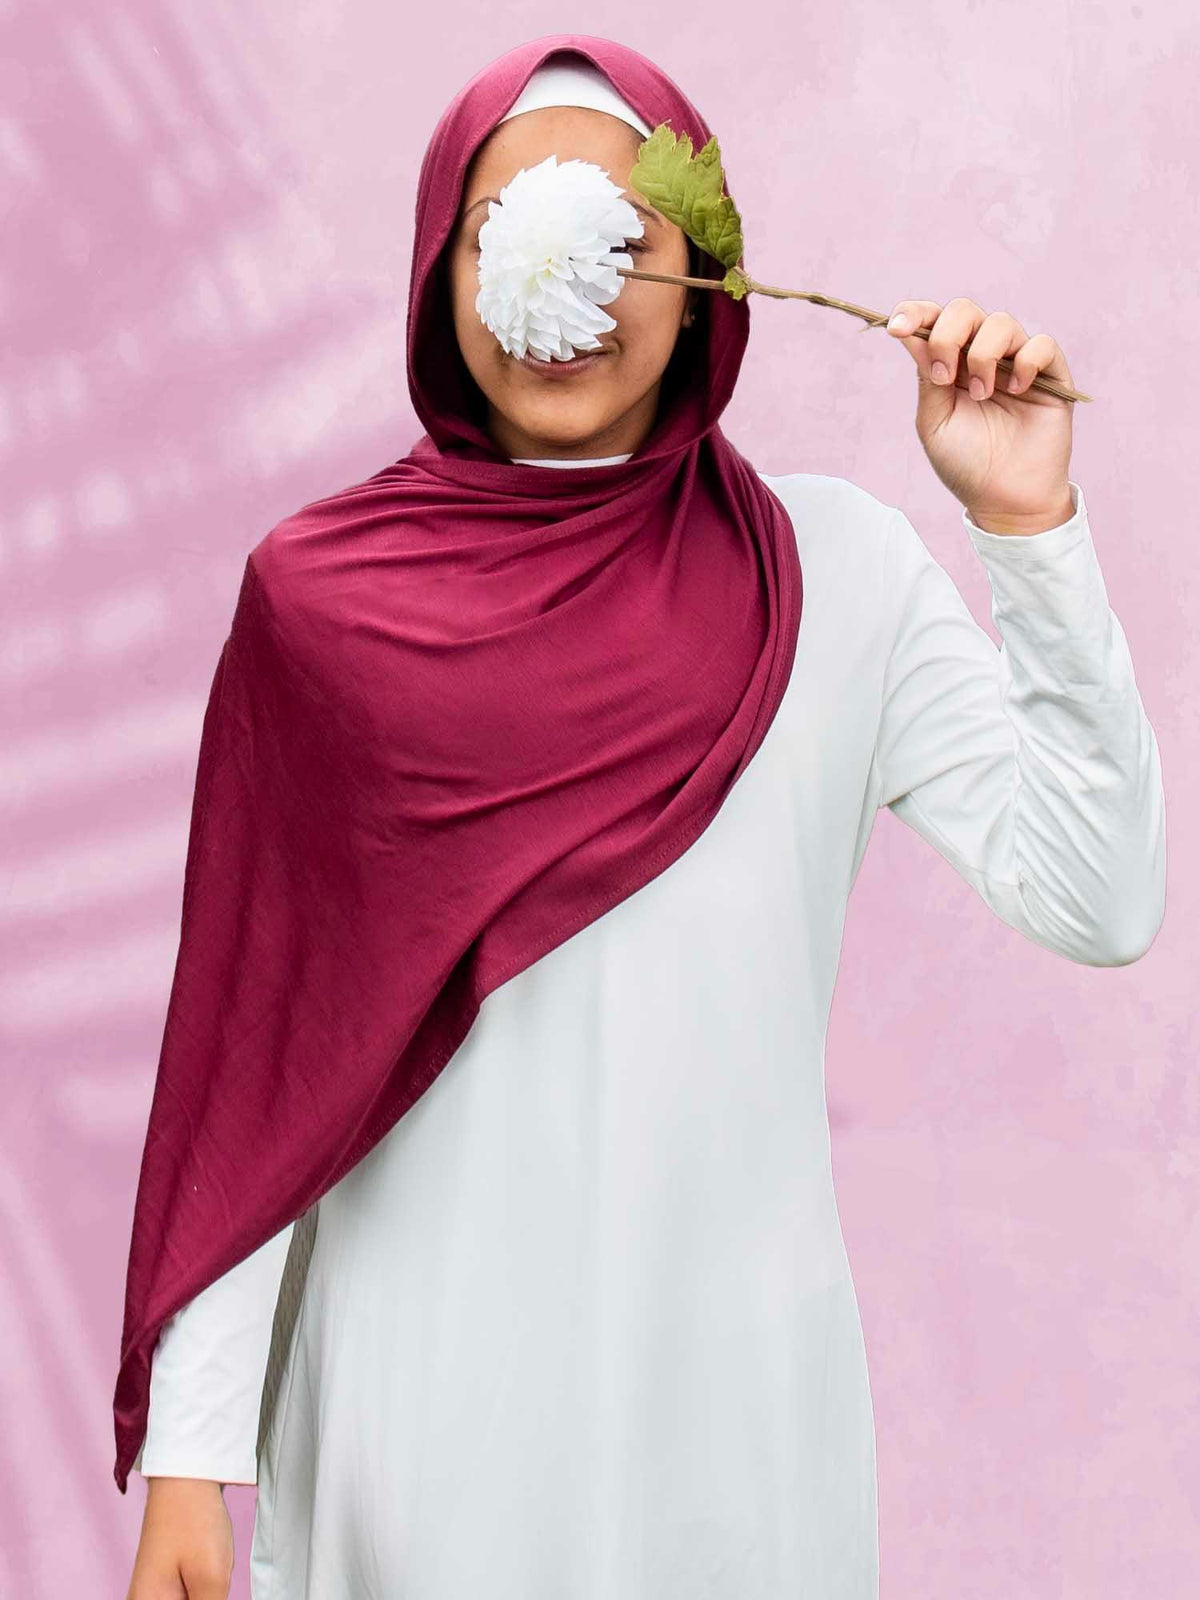 SoftTouch Perfect Fit Hijab in in Red Velvet - BubbleGirl